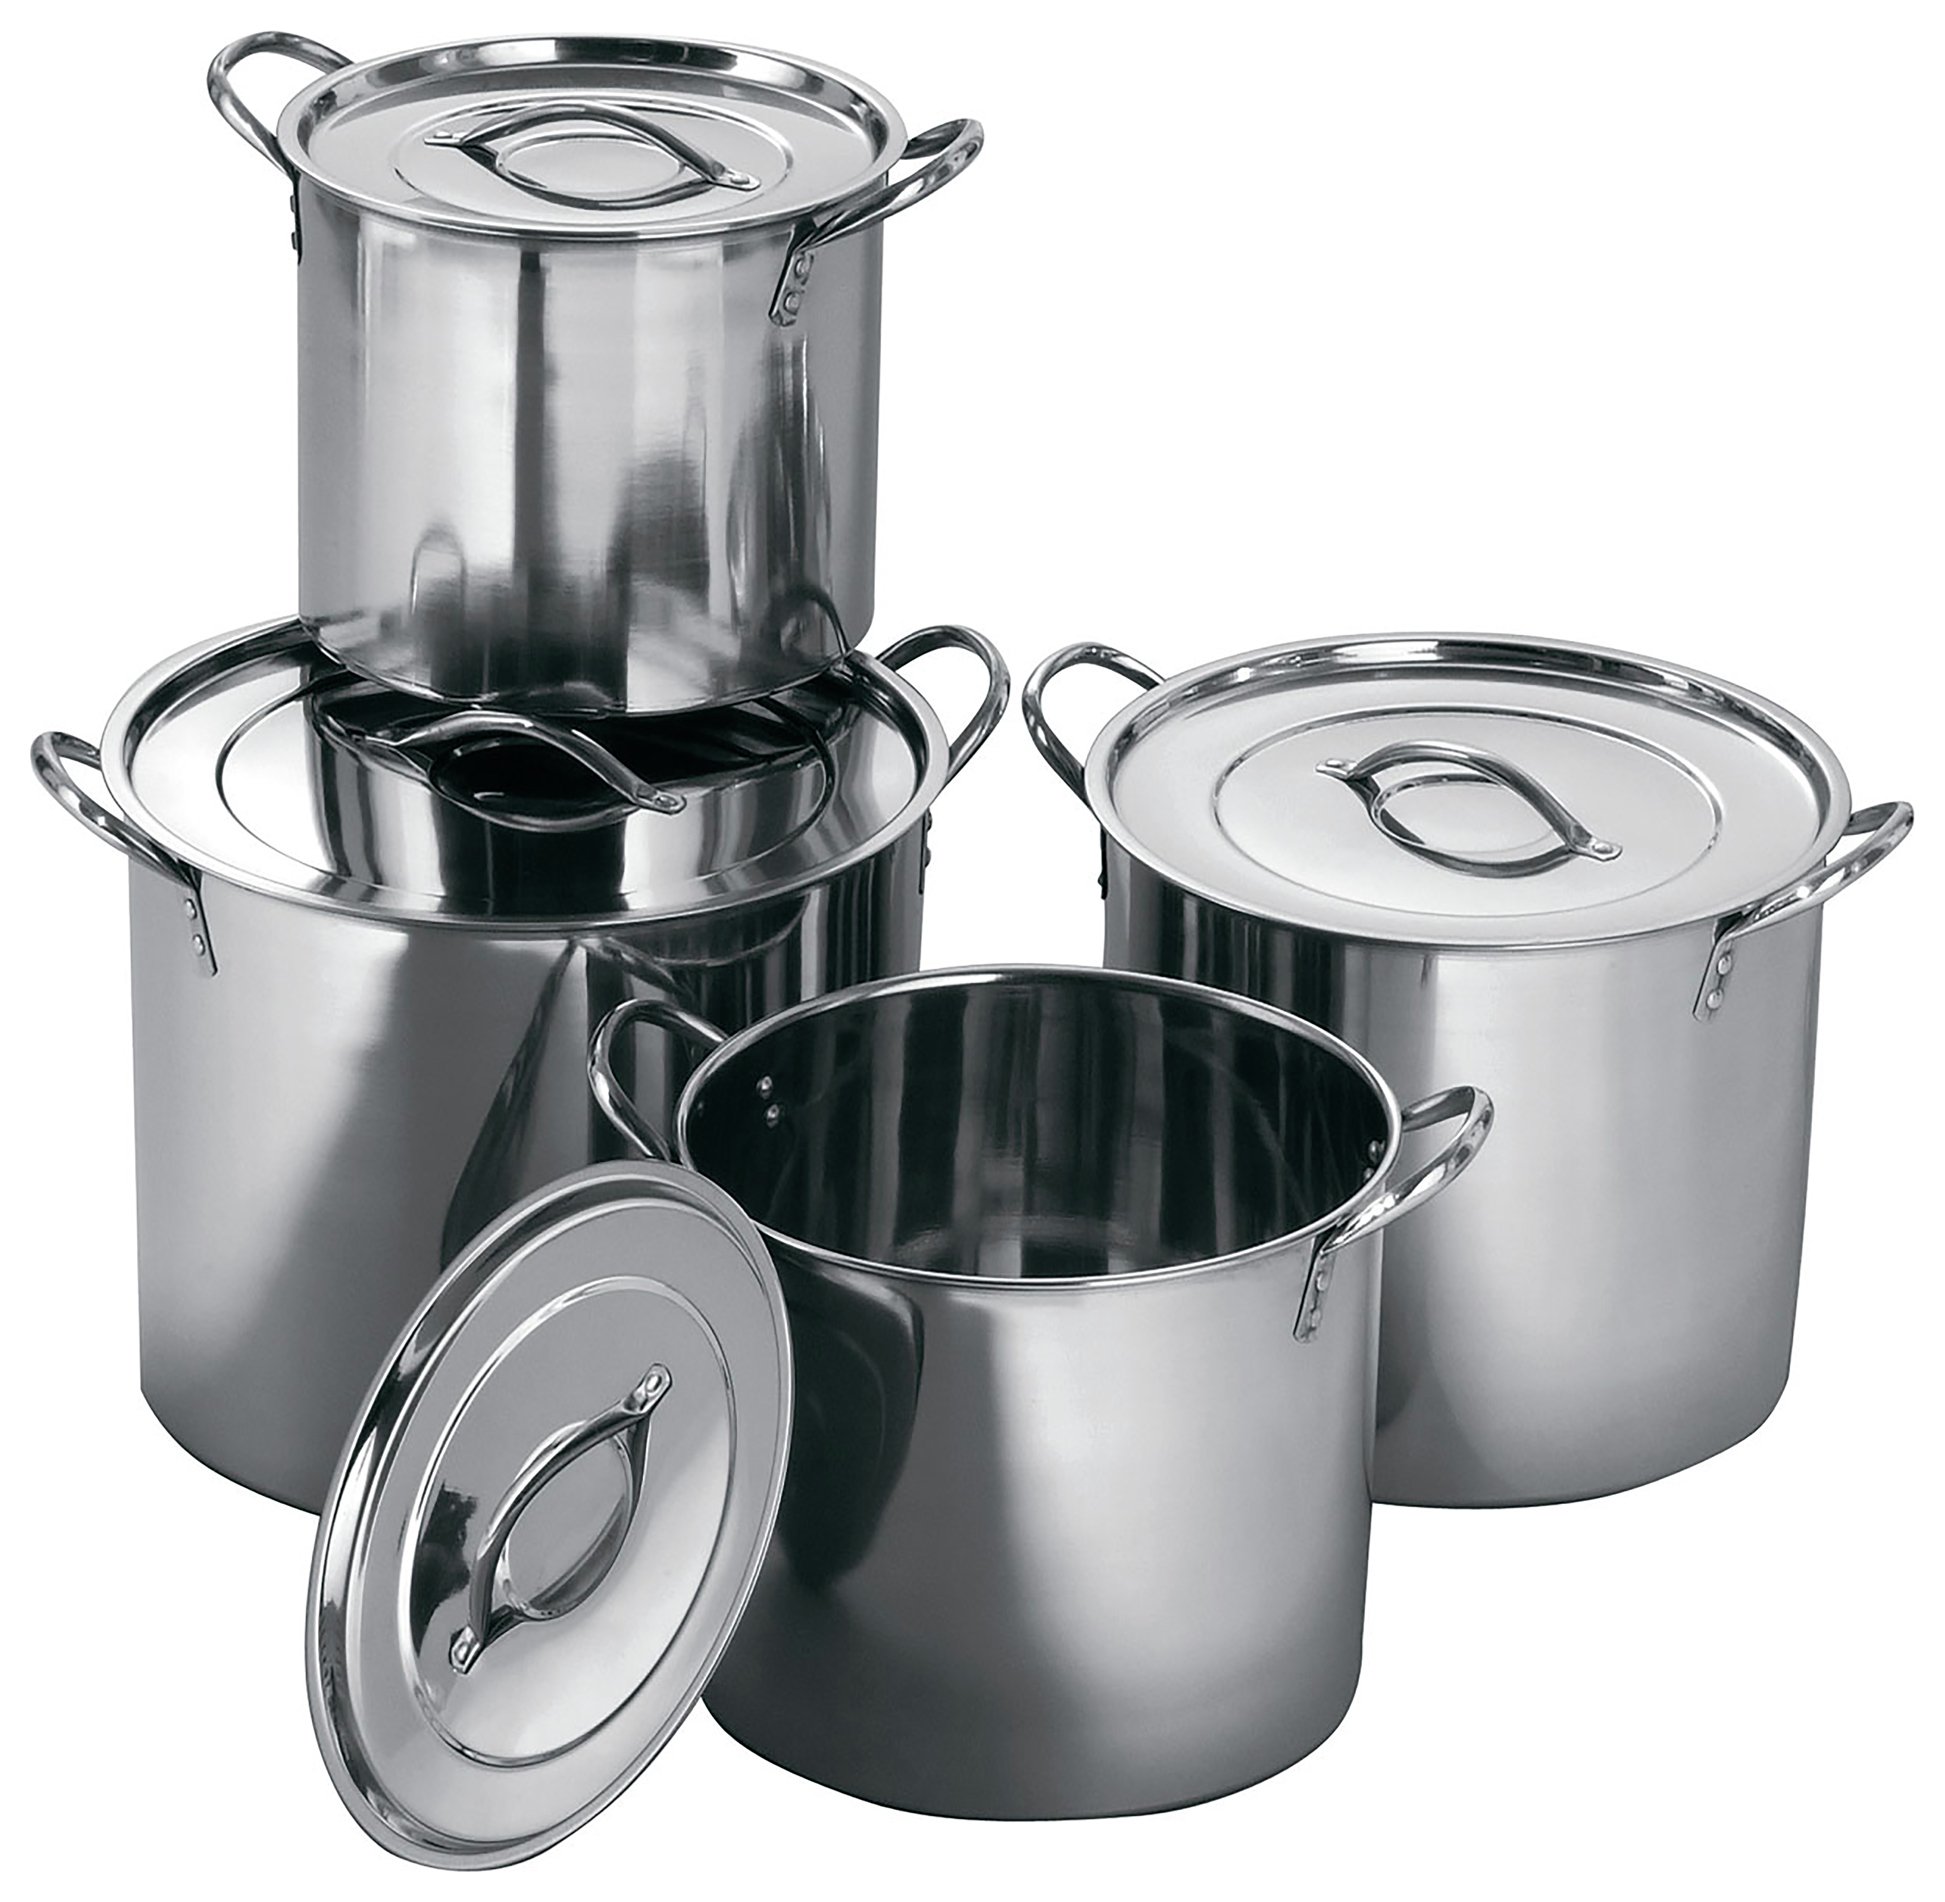 Premier Housewares Set of 4 Stainless Steel Stockpots